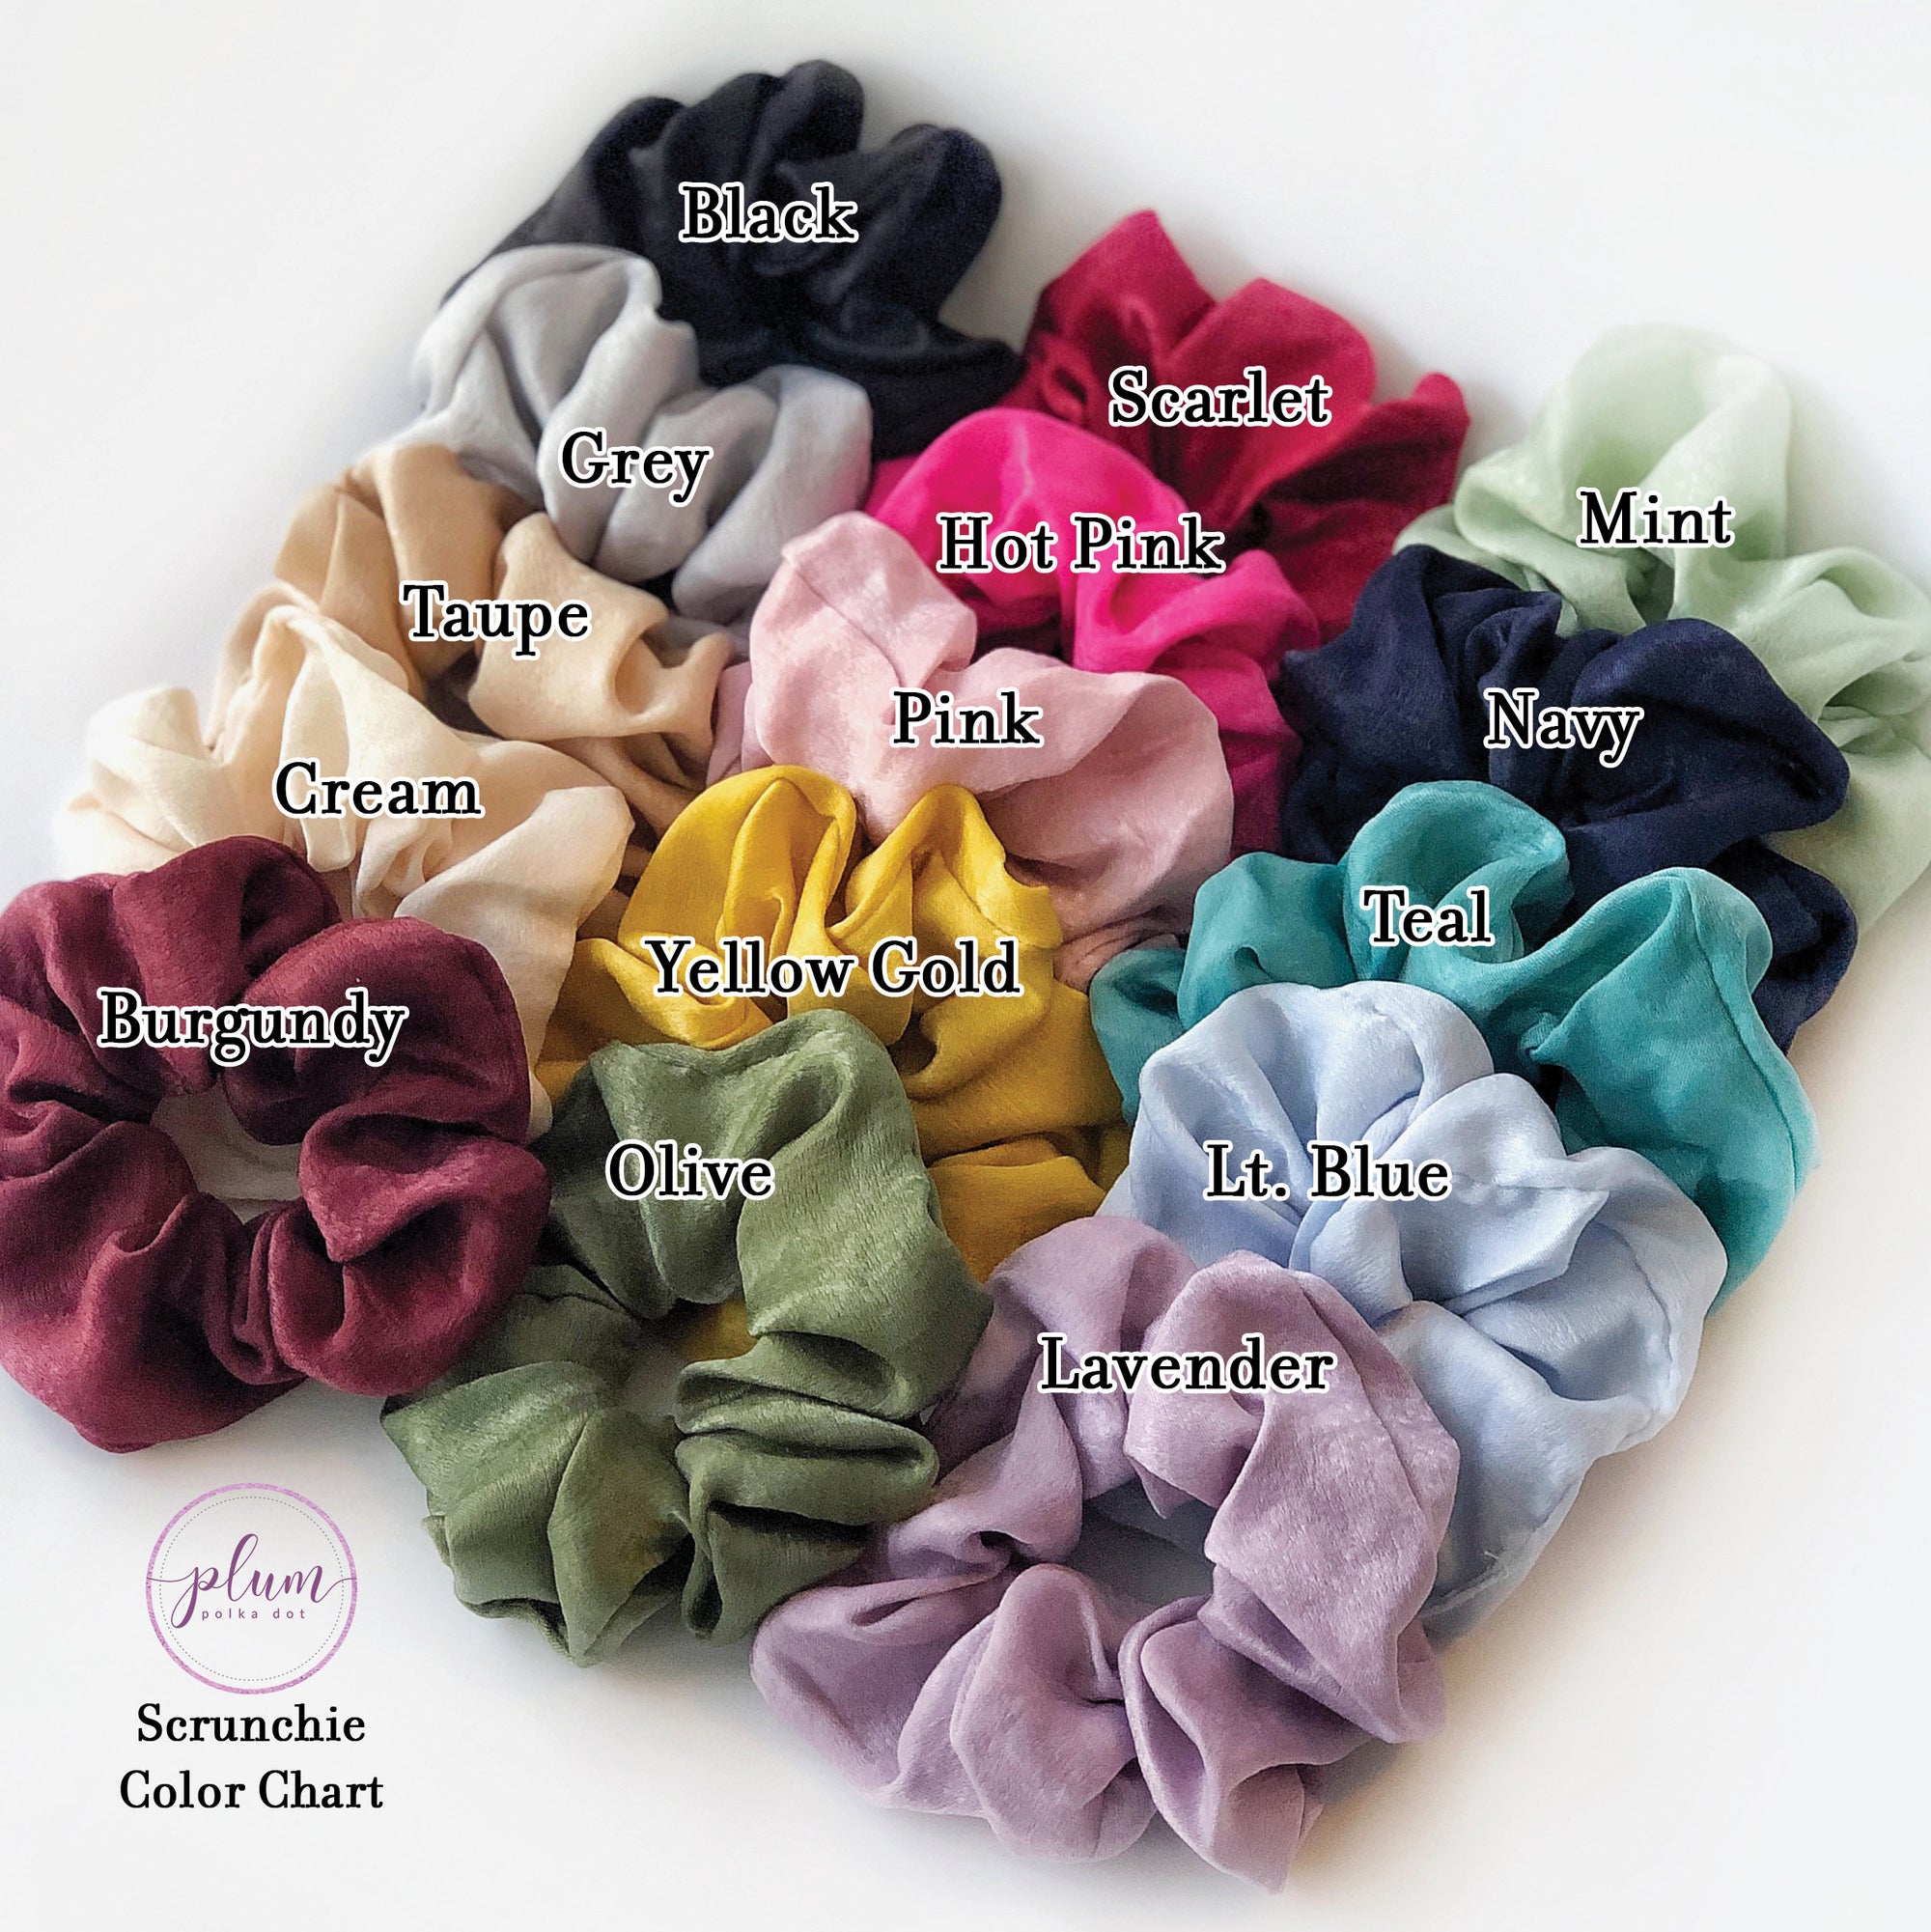 Hair Scrunchie Girls Trip Gifts, Girls Weekend Gifts, Girls Road Trip Gifts, Cheaper Than Therapy Hair Ties Scrunchies, Girls Vacation Gifts